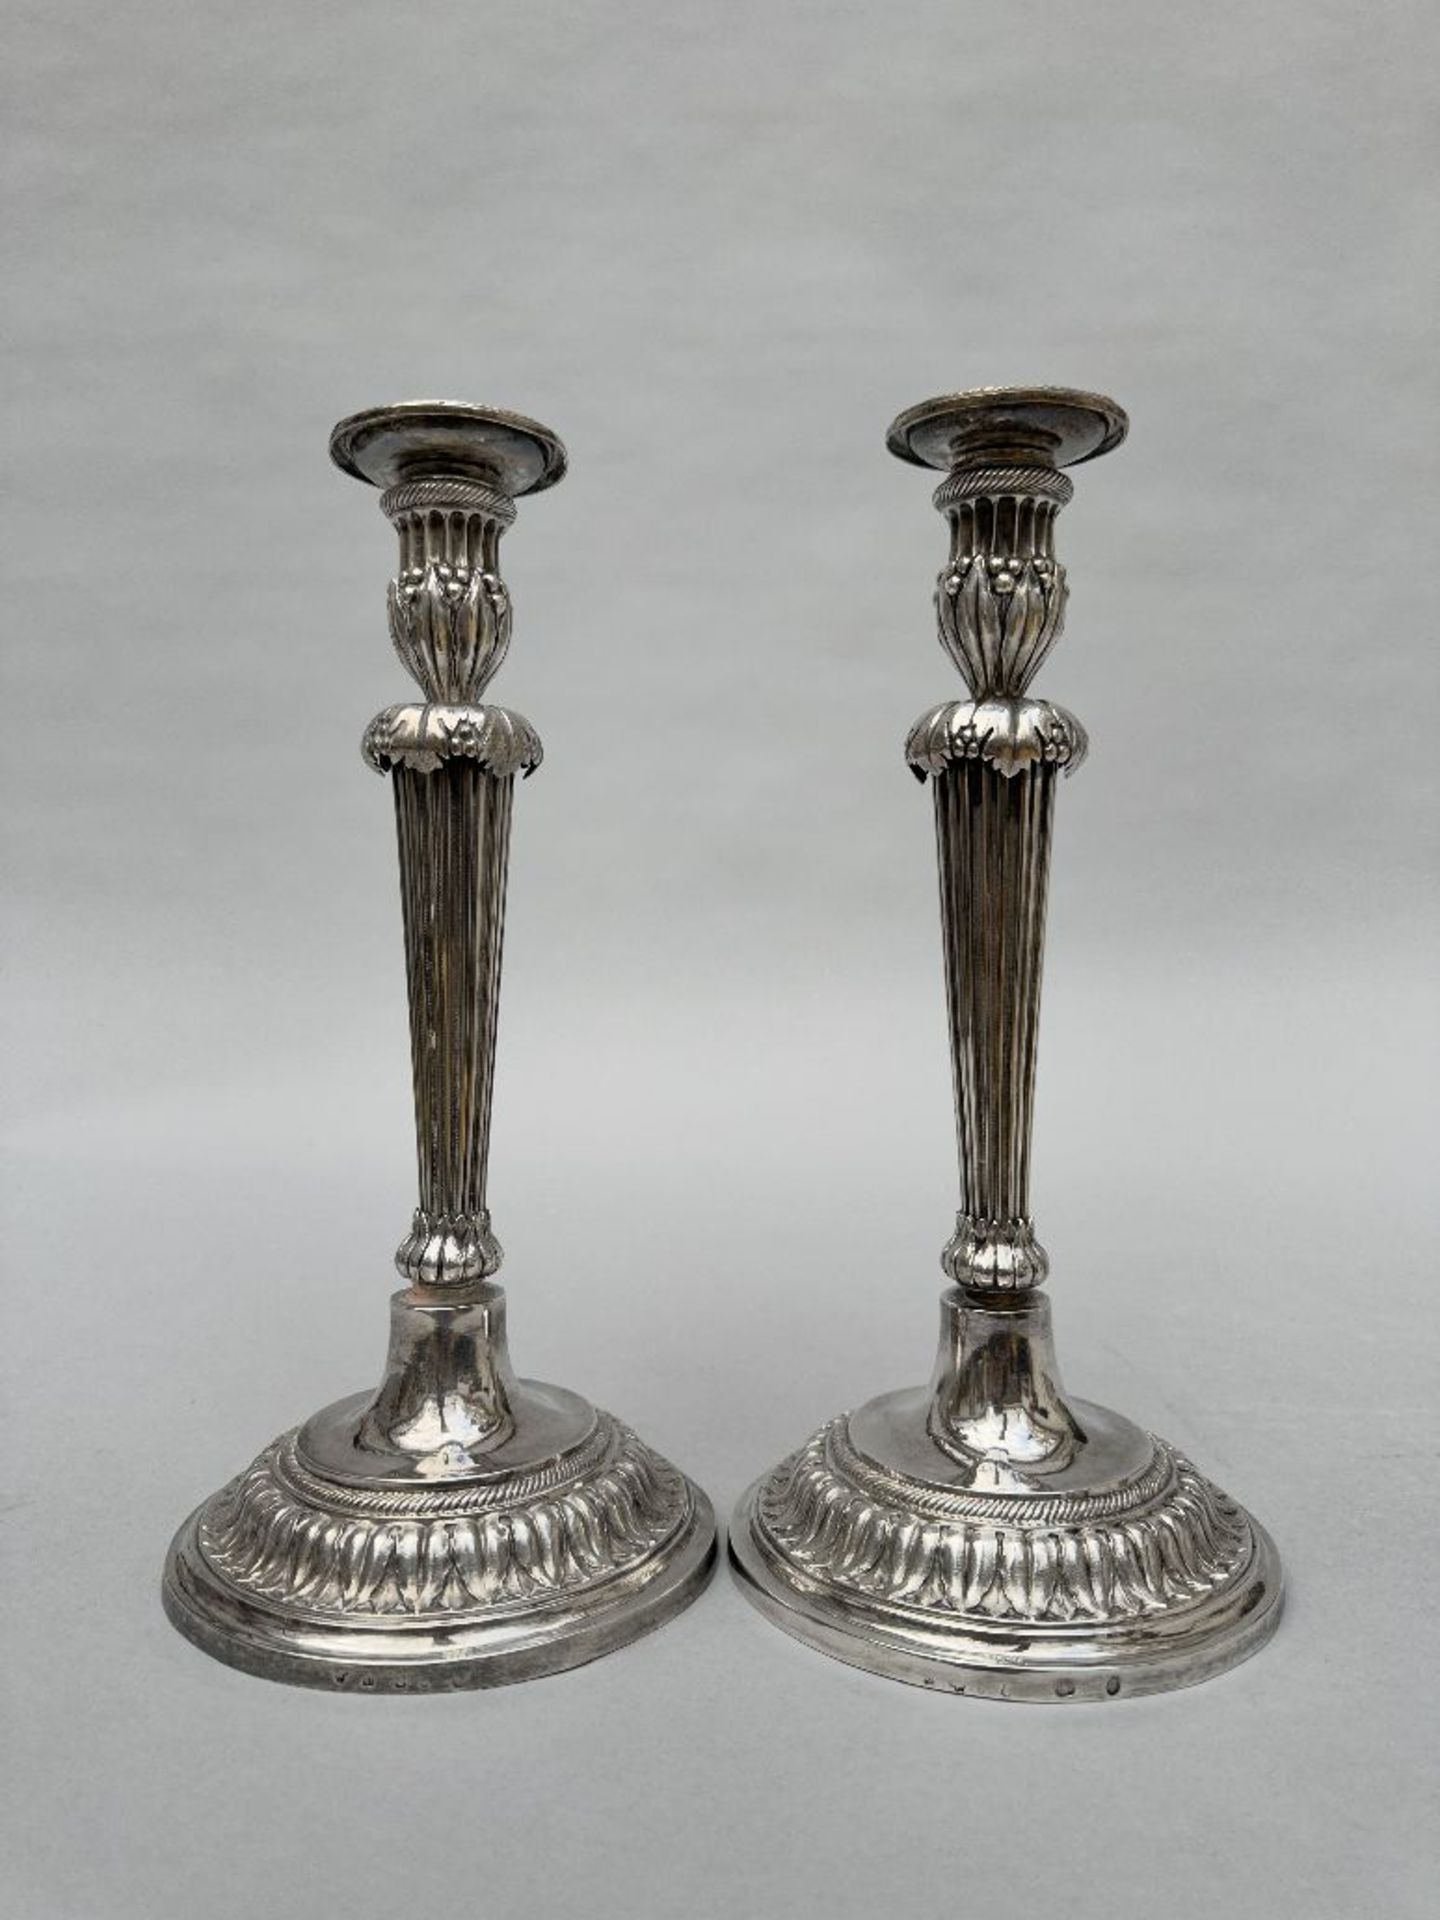 A pair of silver Louis XVI candlesticks by Joannes Baptiste, Ghent 1781 - Image 3 of 8